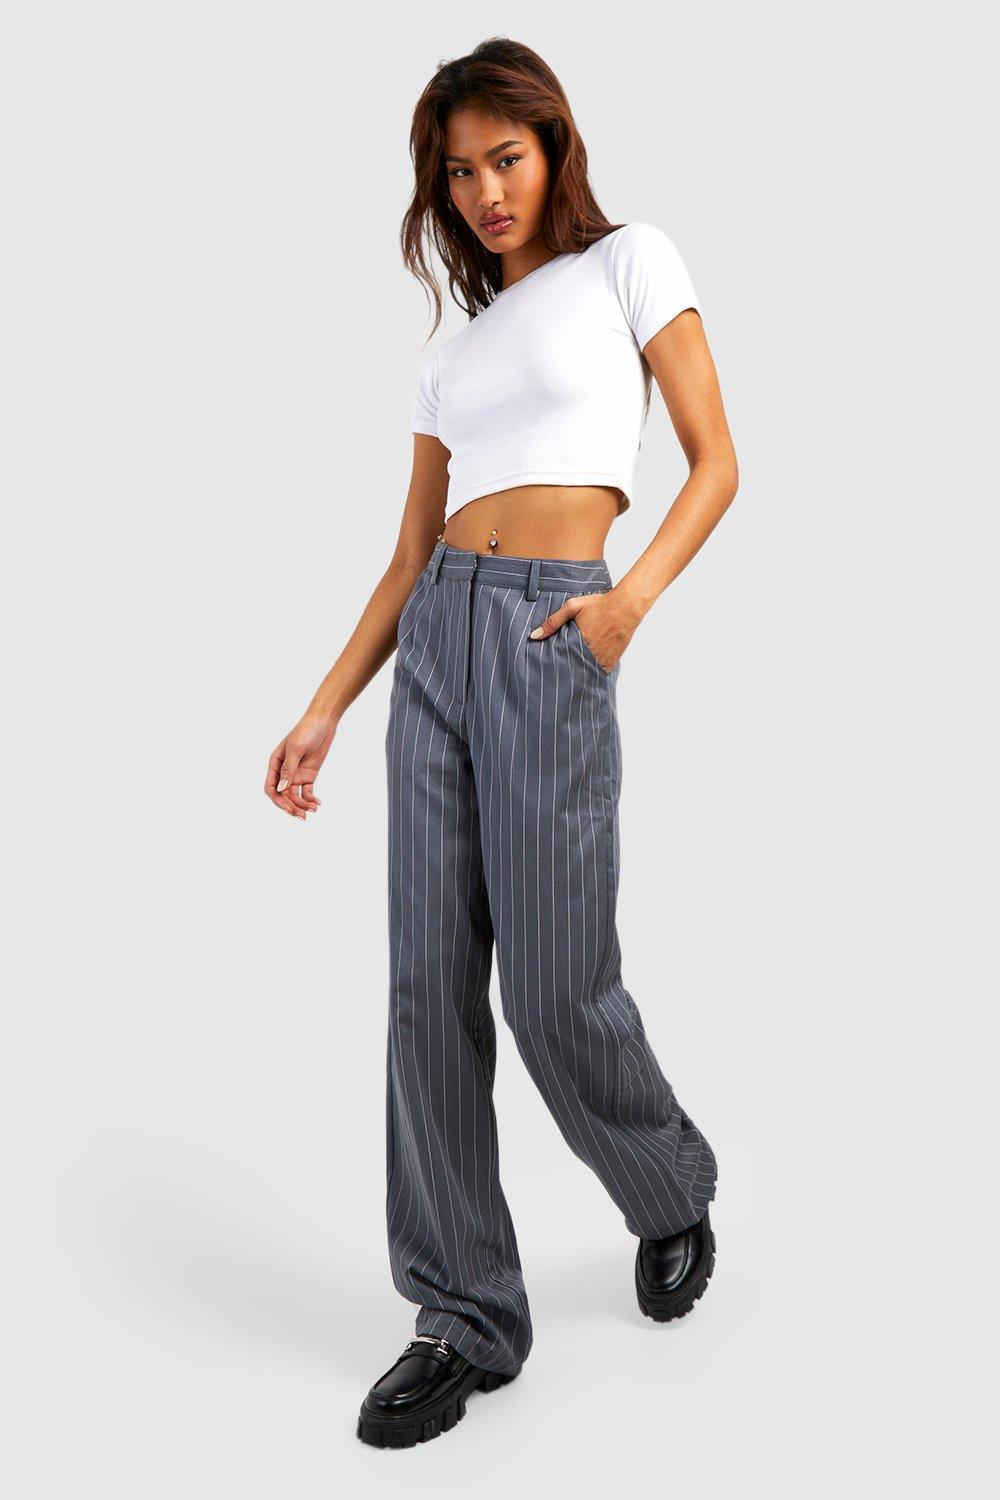 Alex Low Waist Trousers in Ivory – The Dolls House Fashion